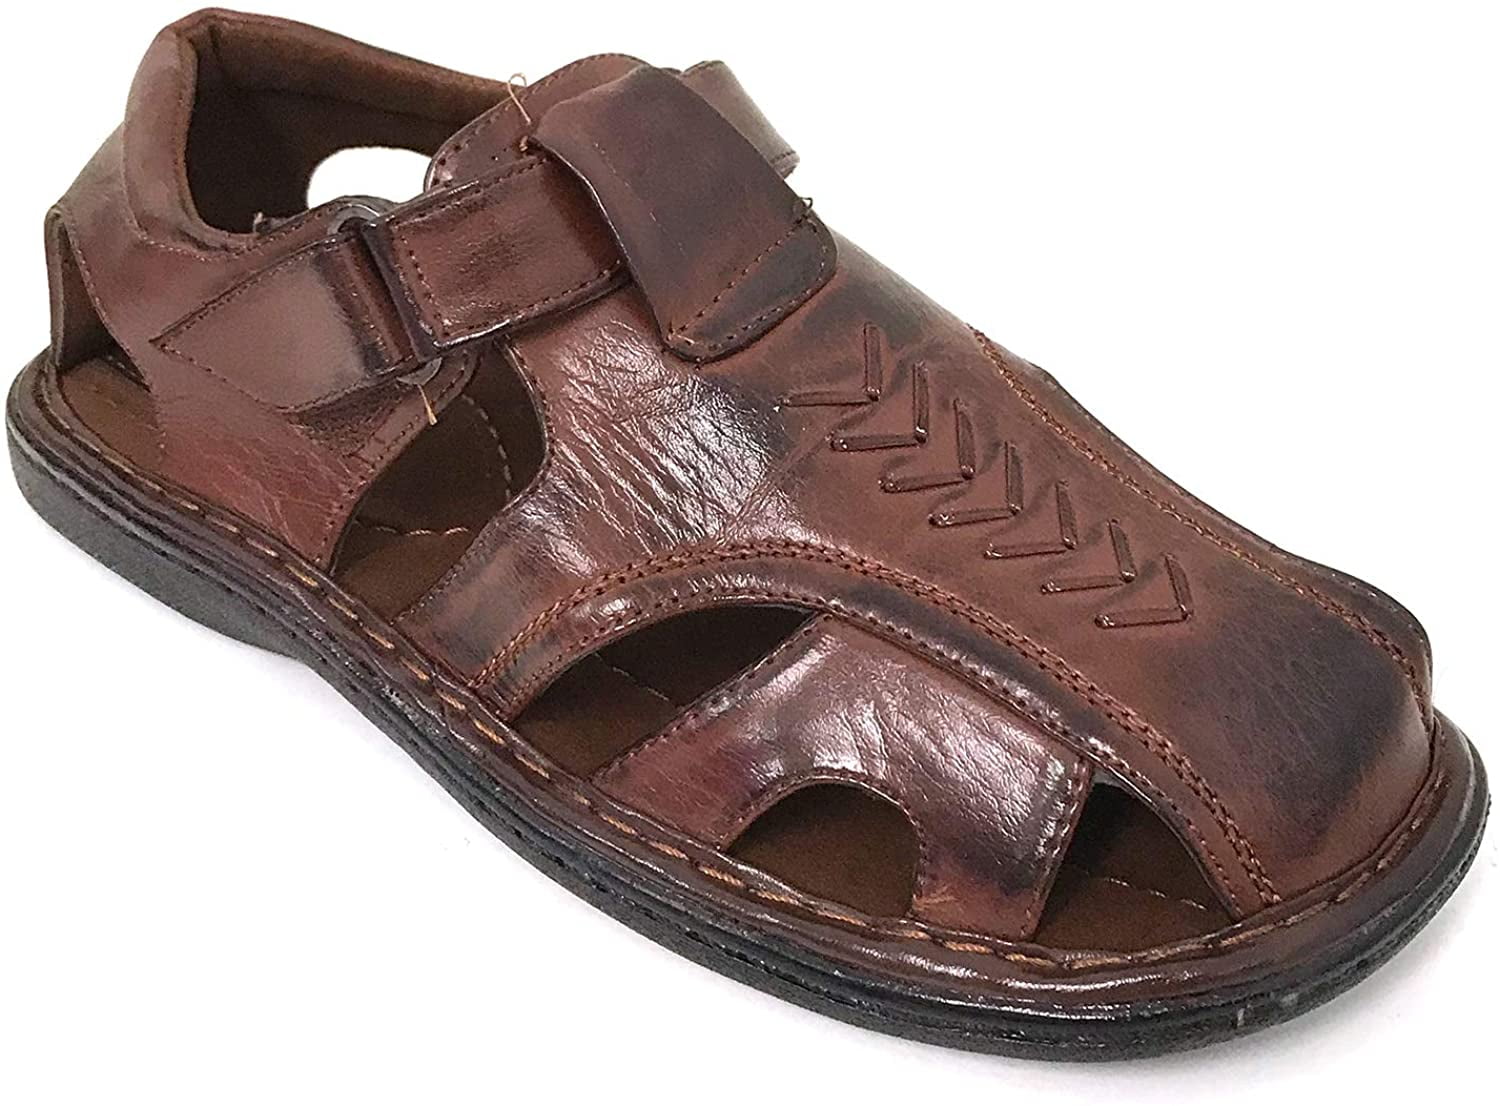 mens sandals with covered toes